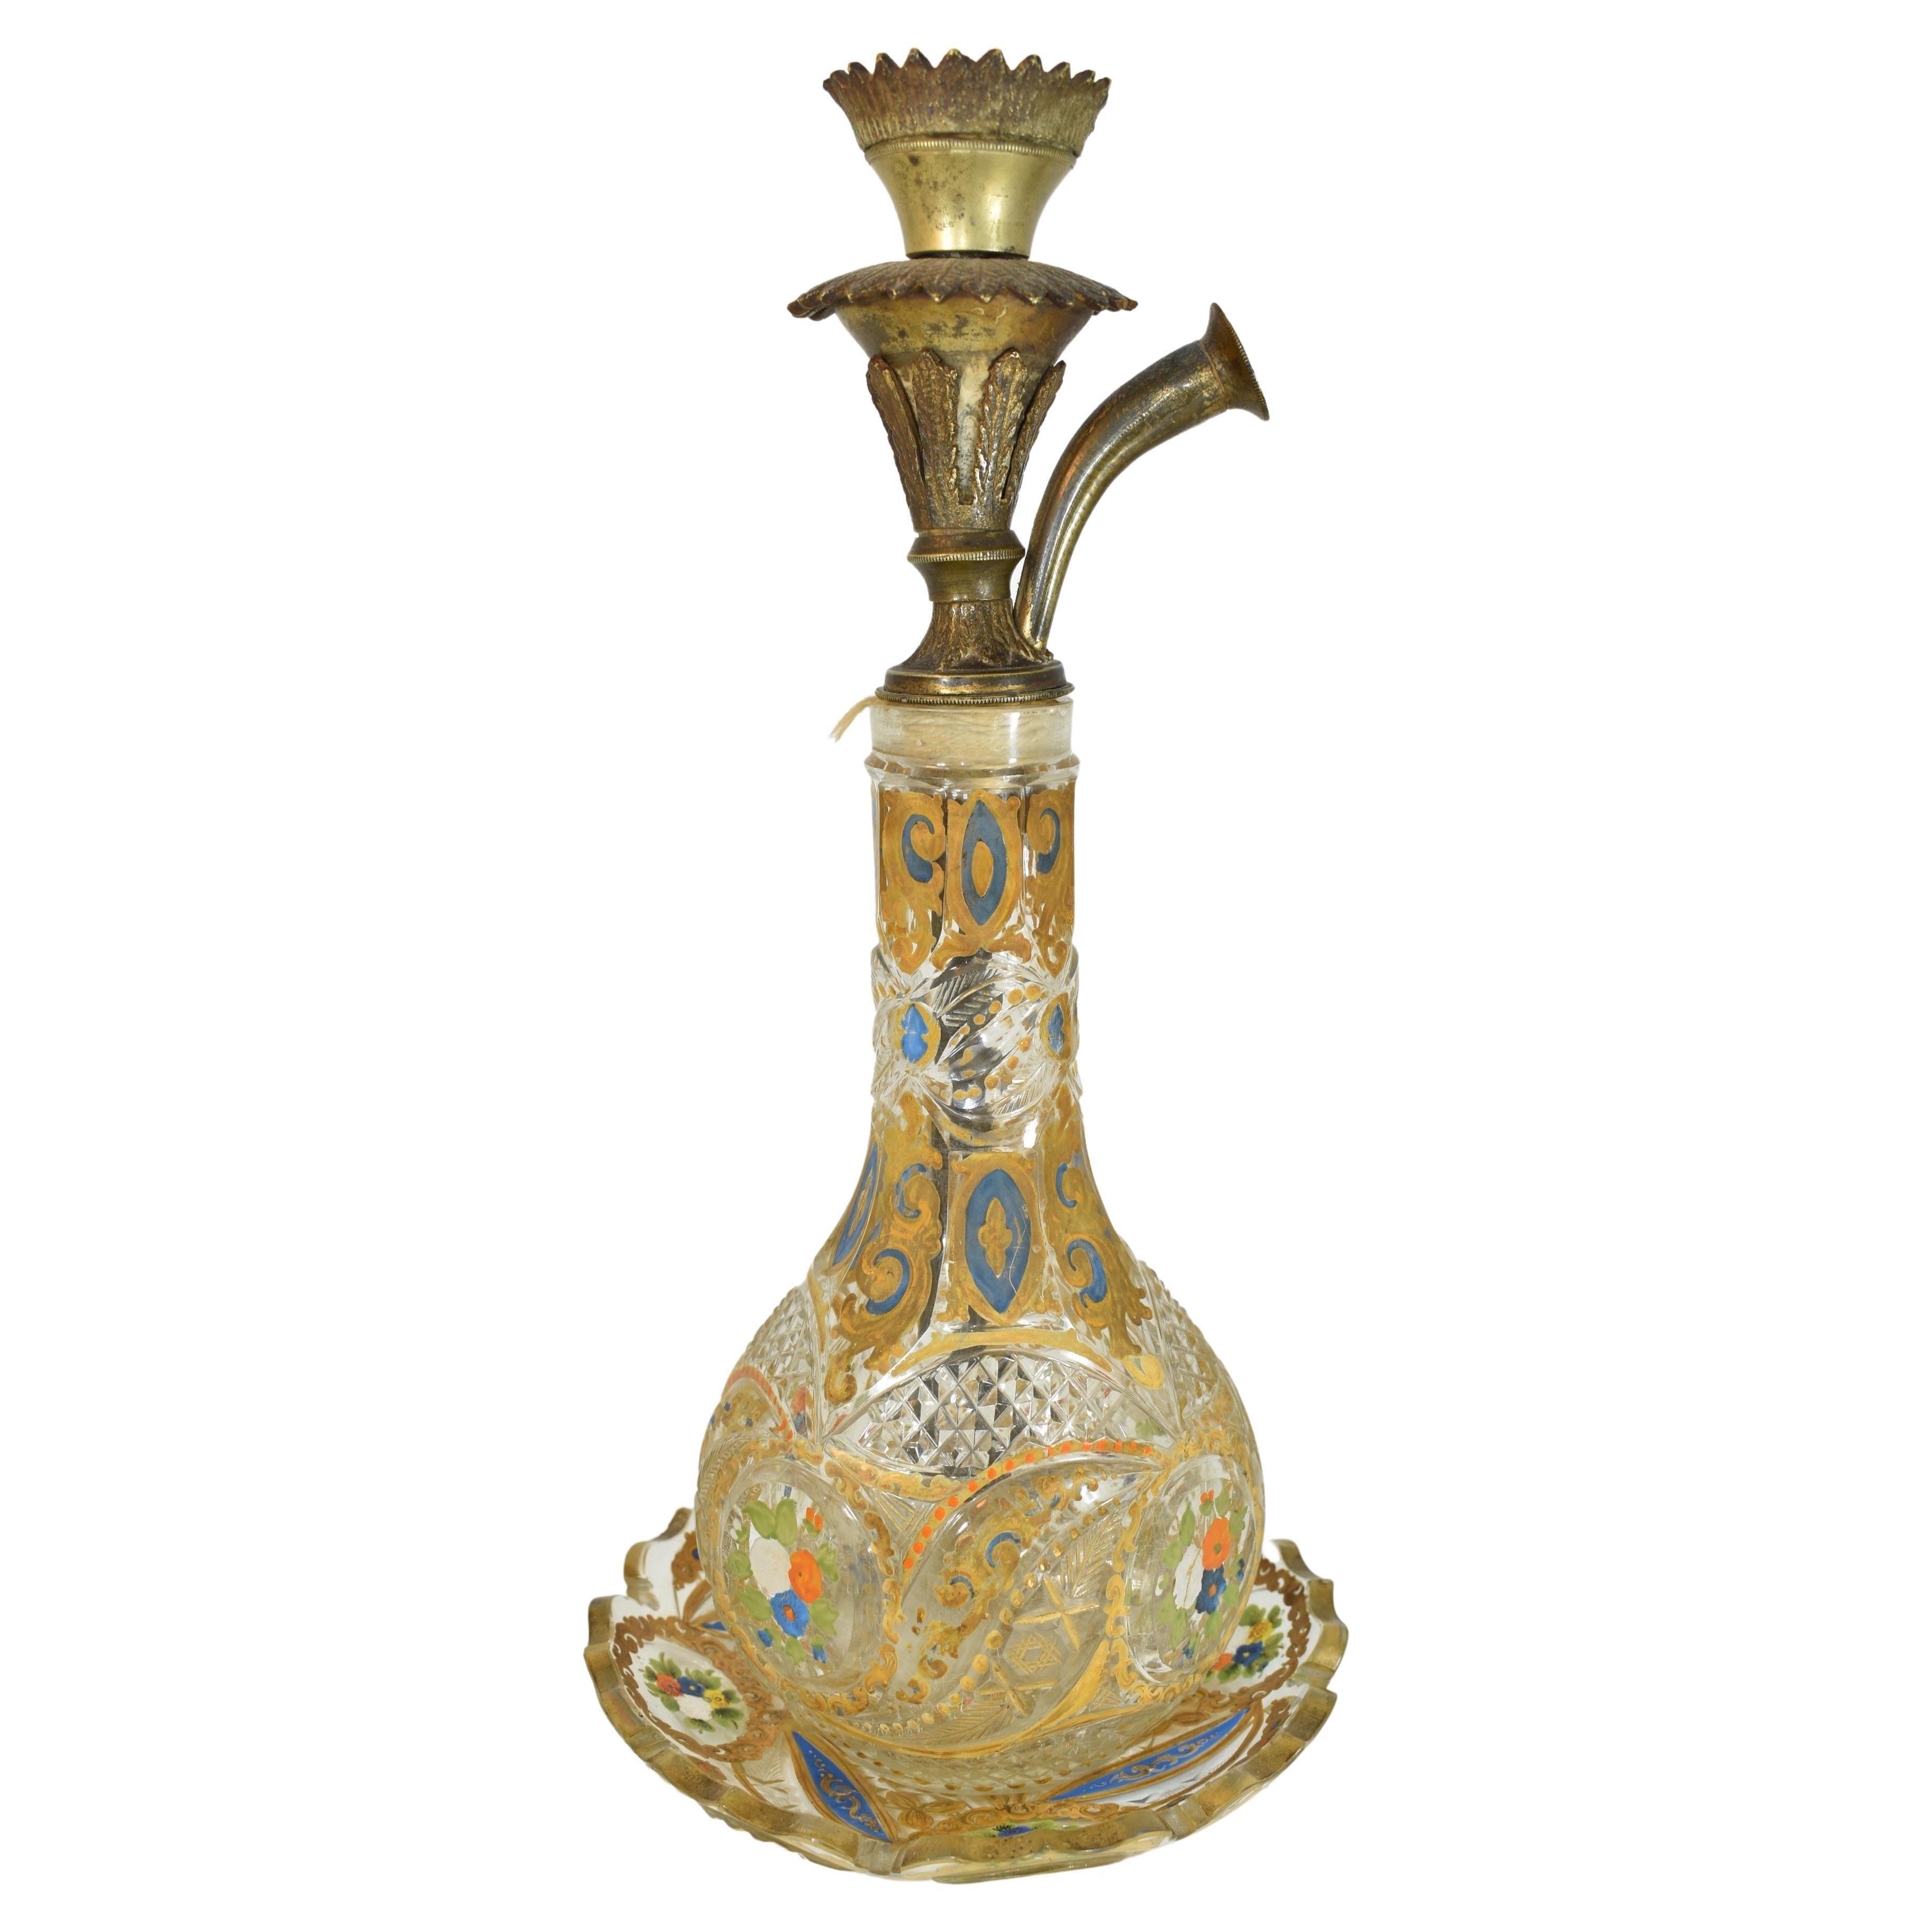 A Bohemian enameled and cut clear-glass hookah base and its matching plate
Mid 19th century
Both the plate and bottle beautifully cut and enamlled with flowers and gilded scrolls, the plate with cut gilded rim.
Made by Bohemin glass manufacturers